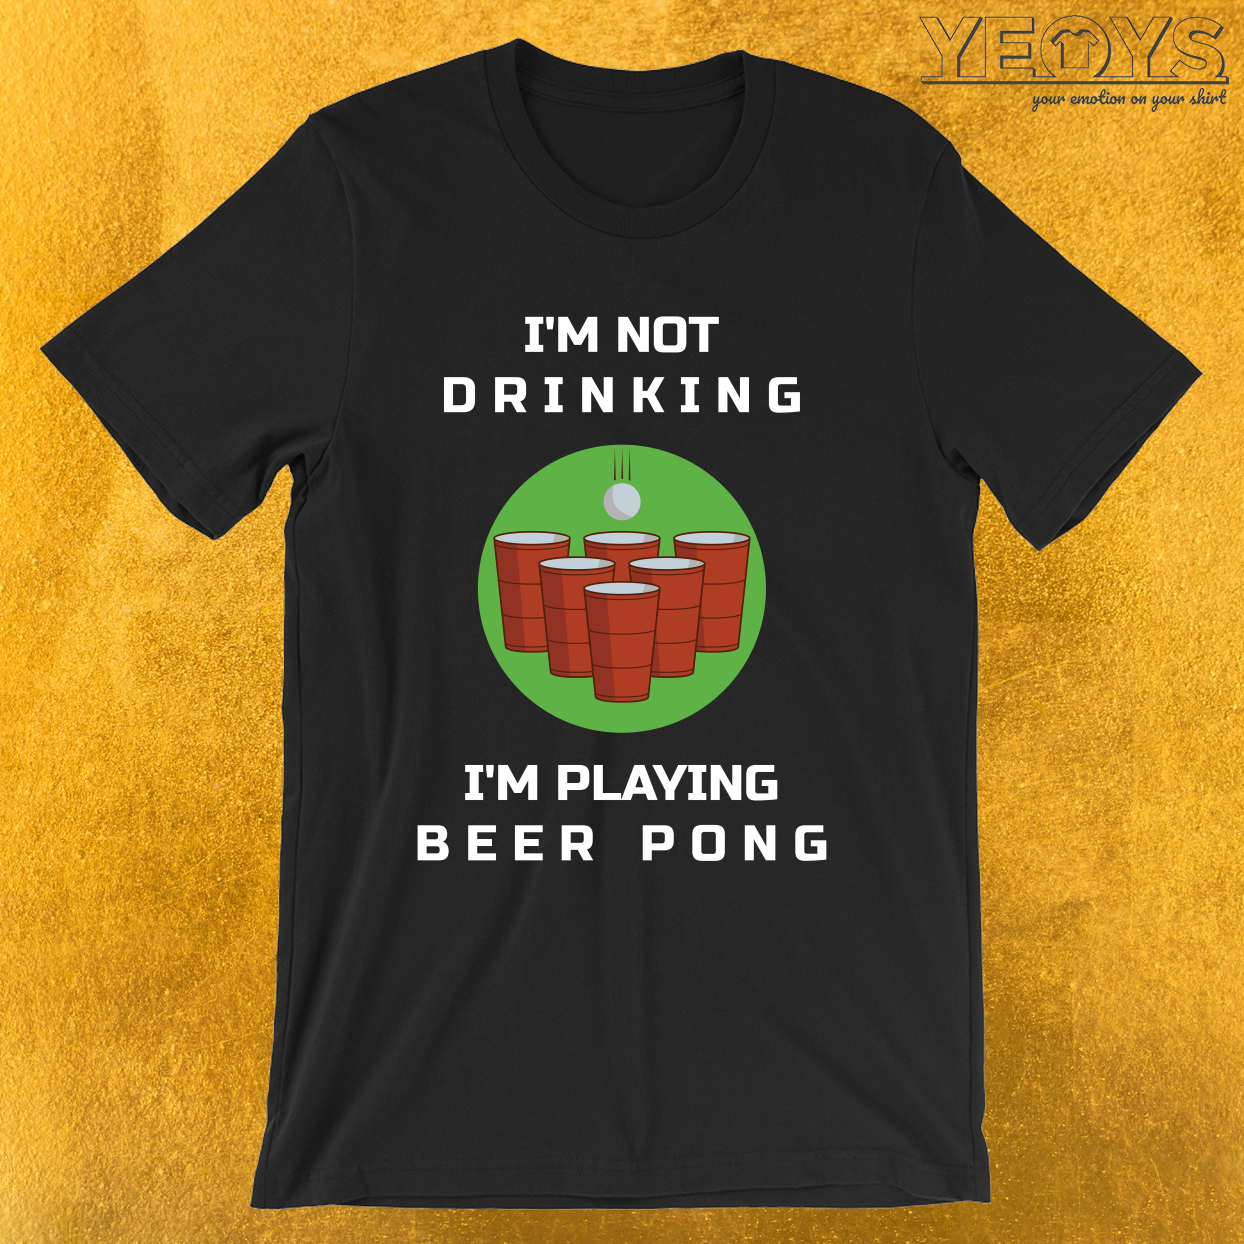 I’m Not Drinking I’m Playing Beer Pong – Funny Beer Pong Tee